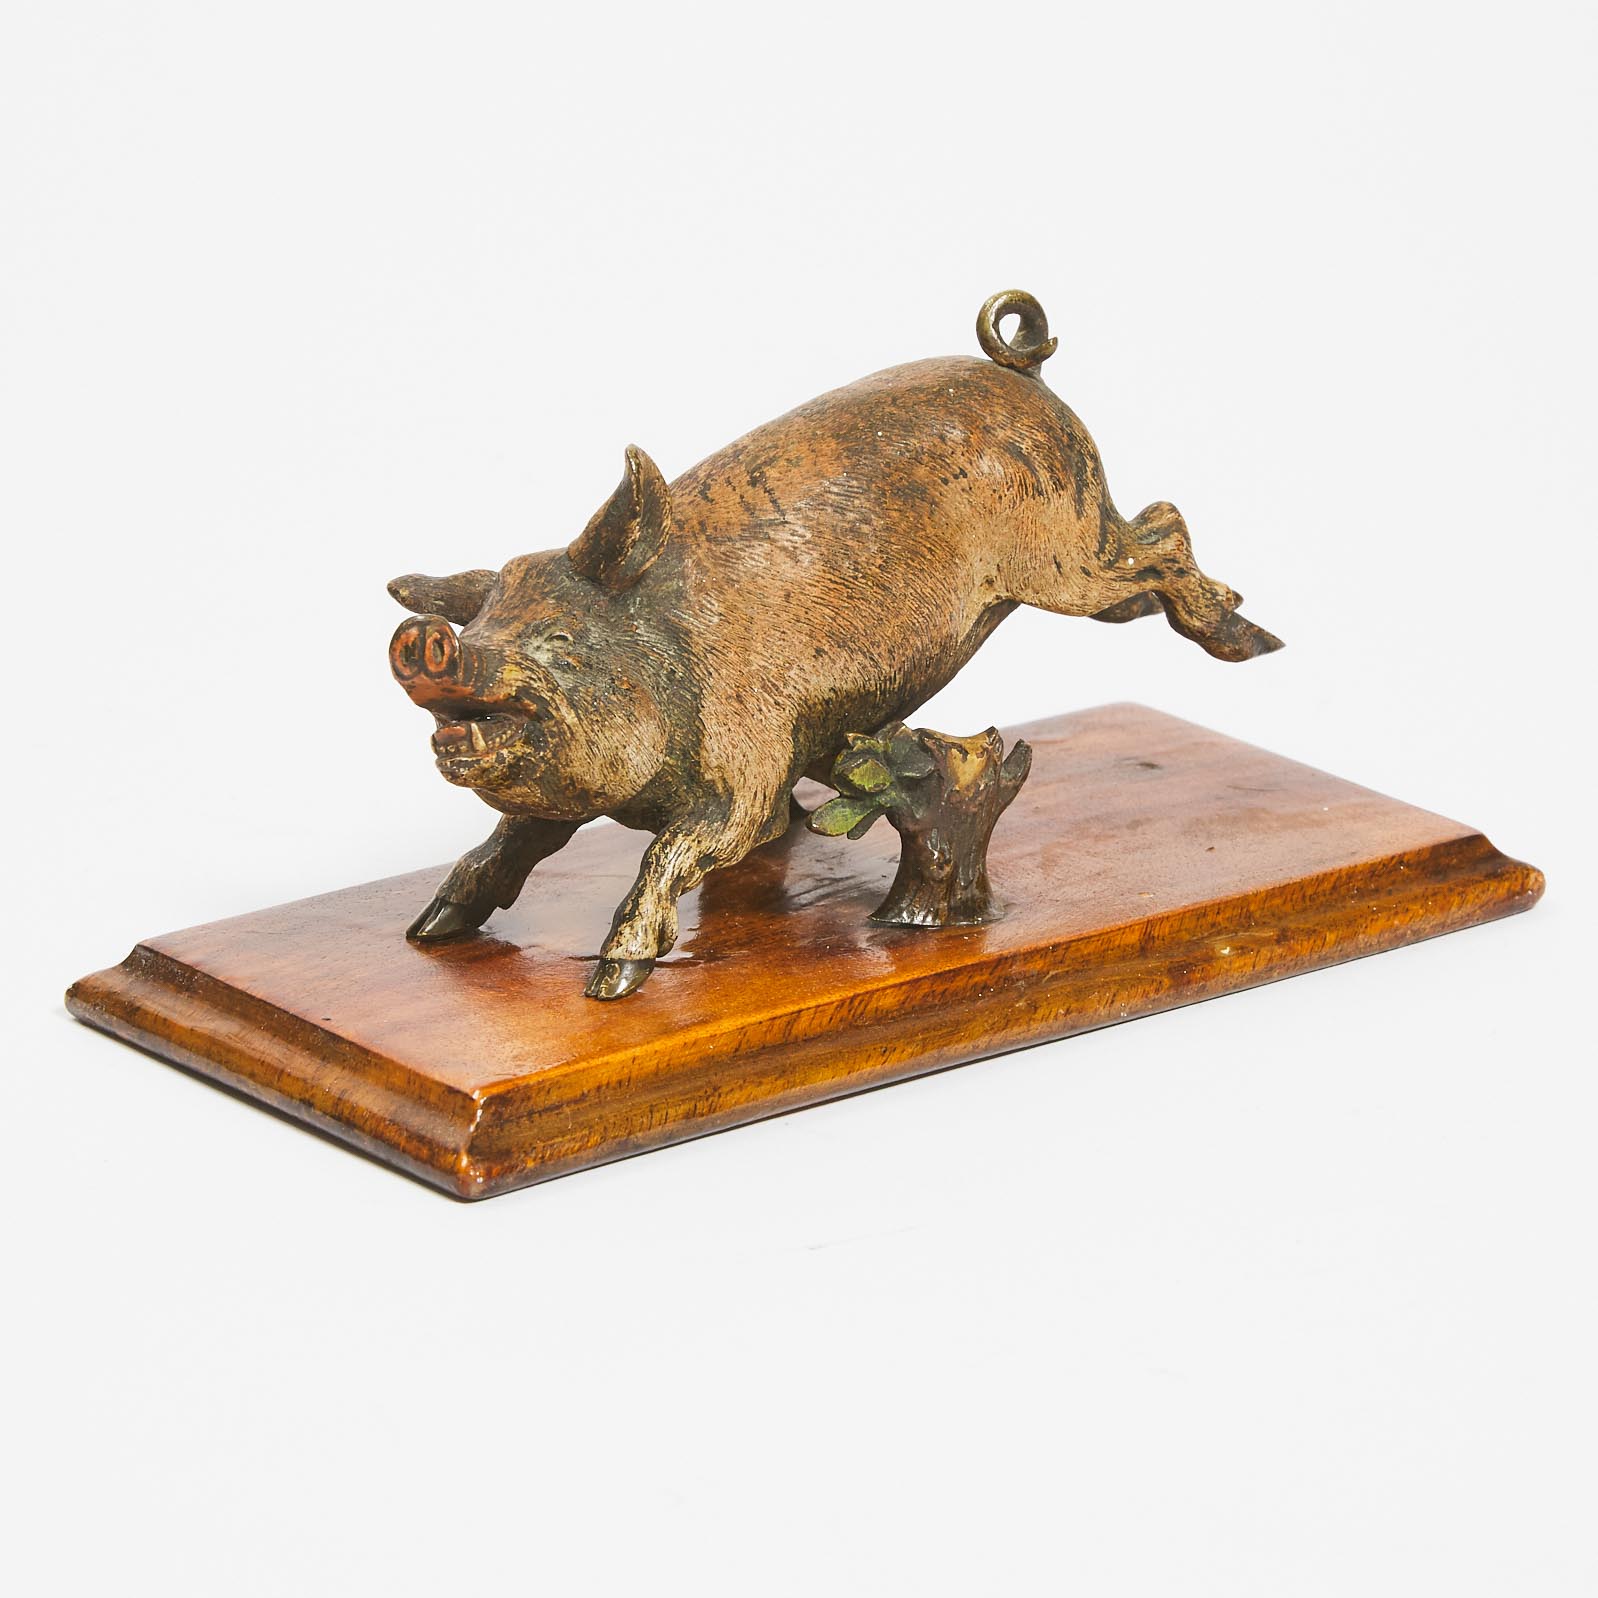 Austrian Cold Painted Bronze Boar Form Desk Top Paper Clip, 19th/early 20th century